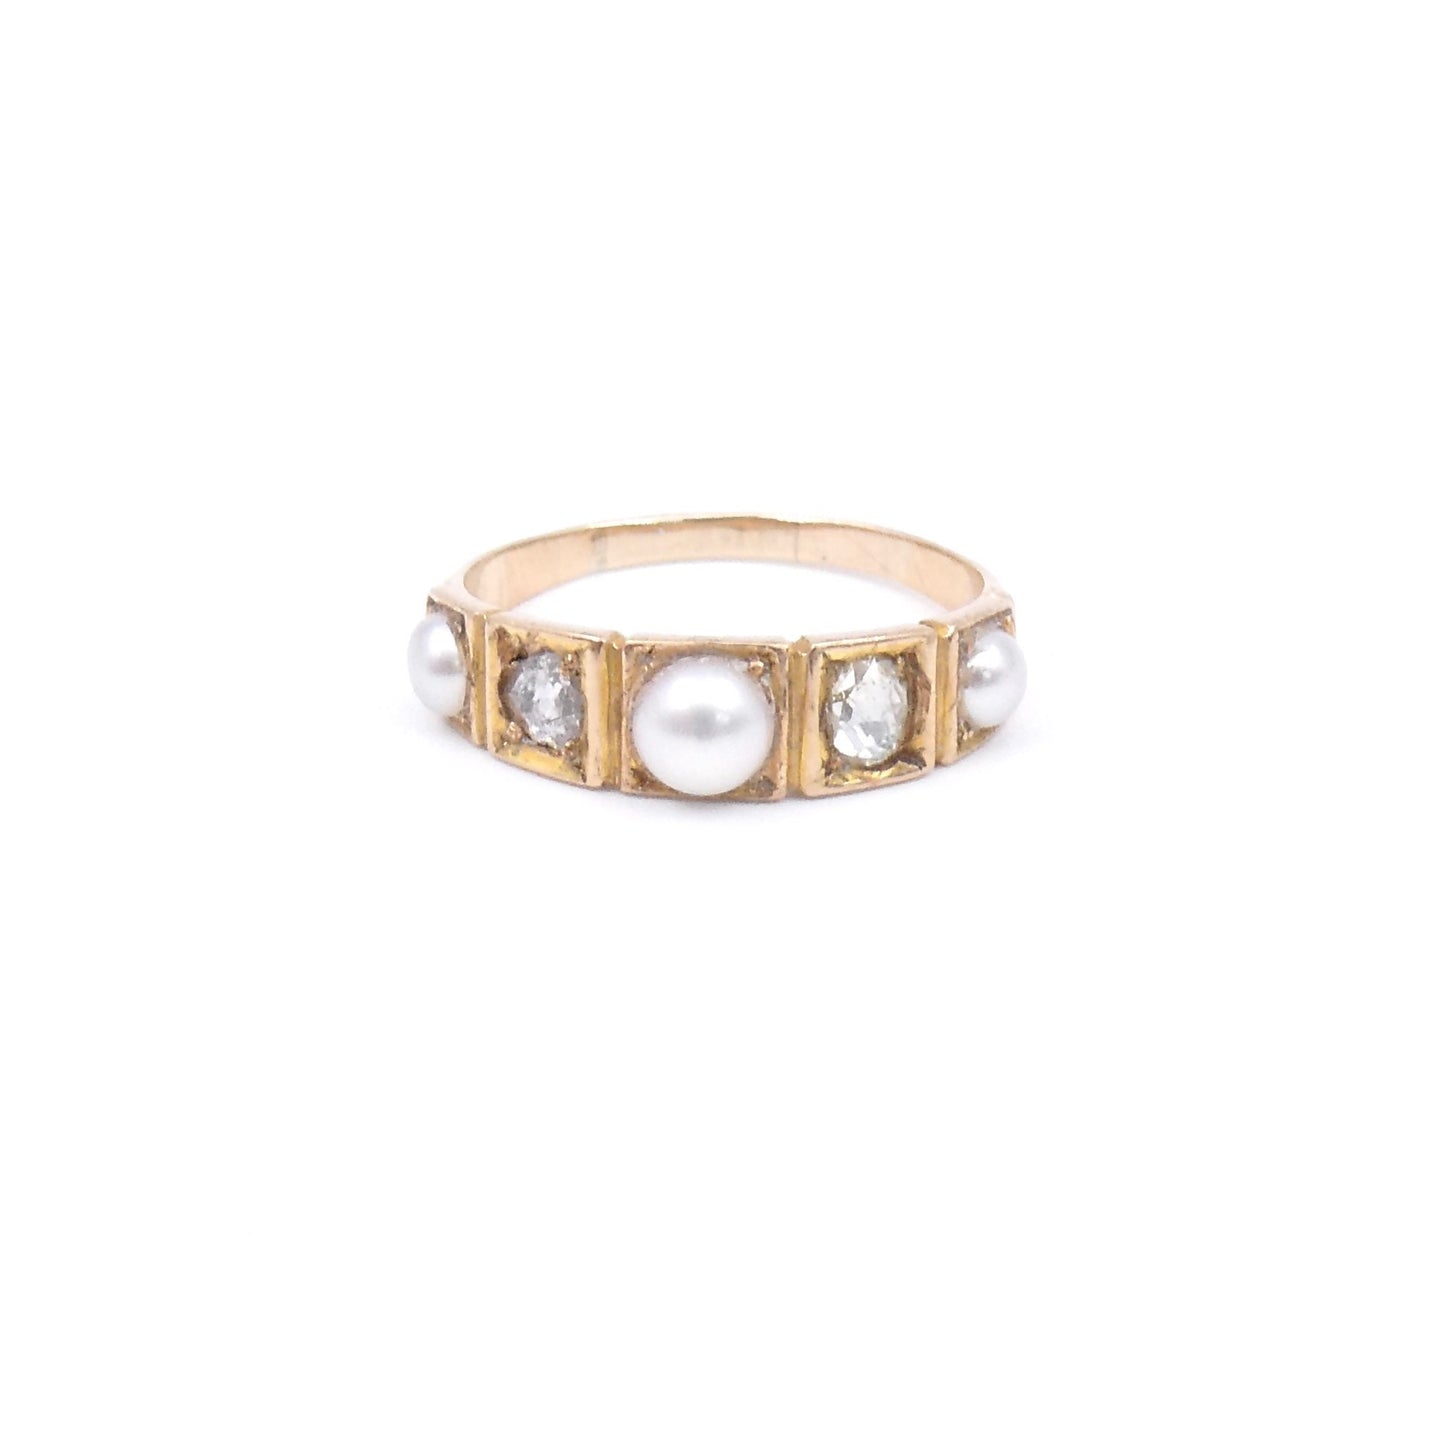 Antique pearl and diamond 18kt gold ring, a victorian ring with alternating gemstones in a square design.